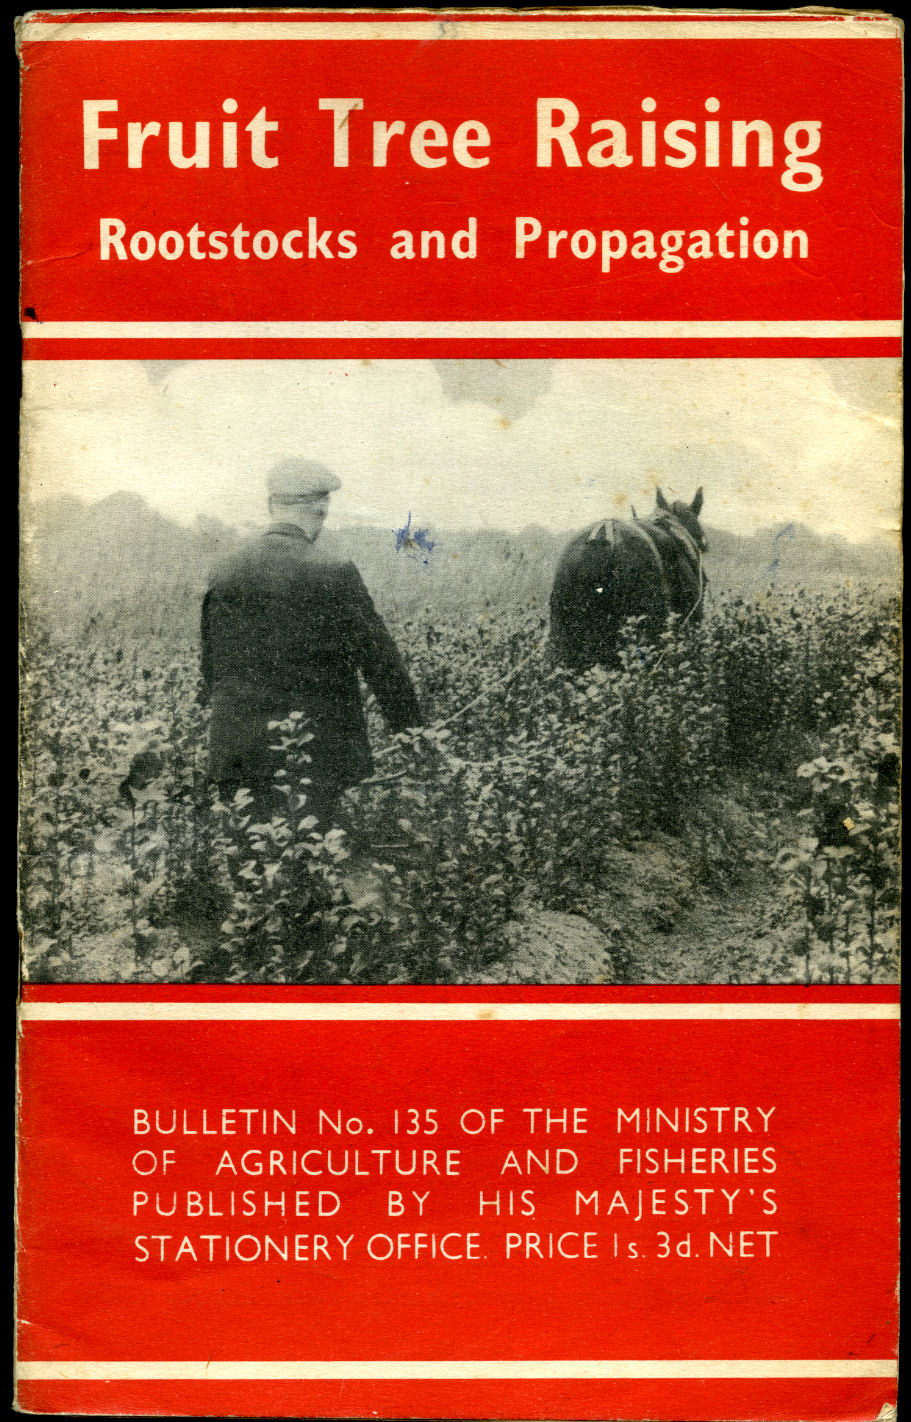 [MINISTRY OF AGRICULTURE AND FISHERIES] - Fruit Tree Raising | Ministry of Agriculture and Fisheries Bulletin No. 135 | H.M.S.O. Wartime Booklet